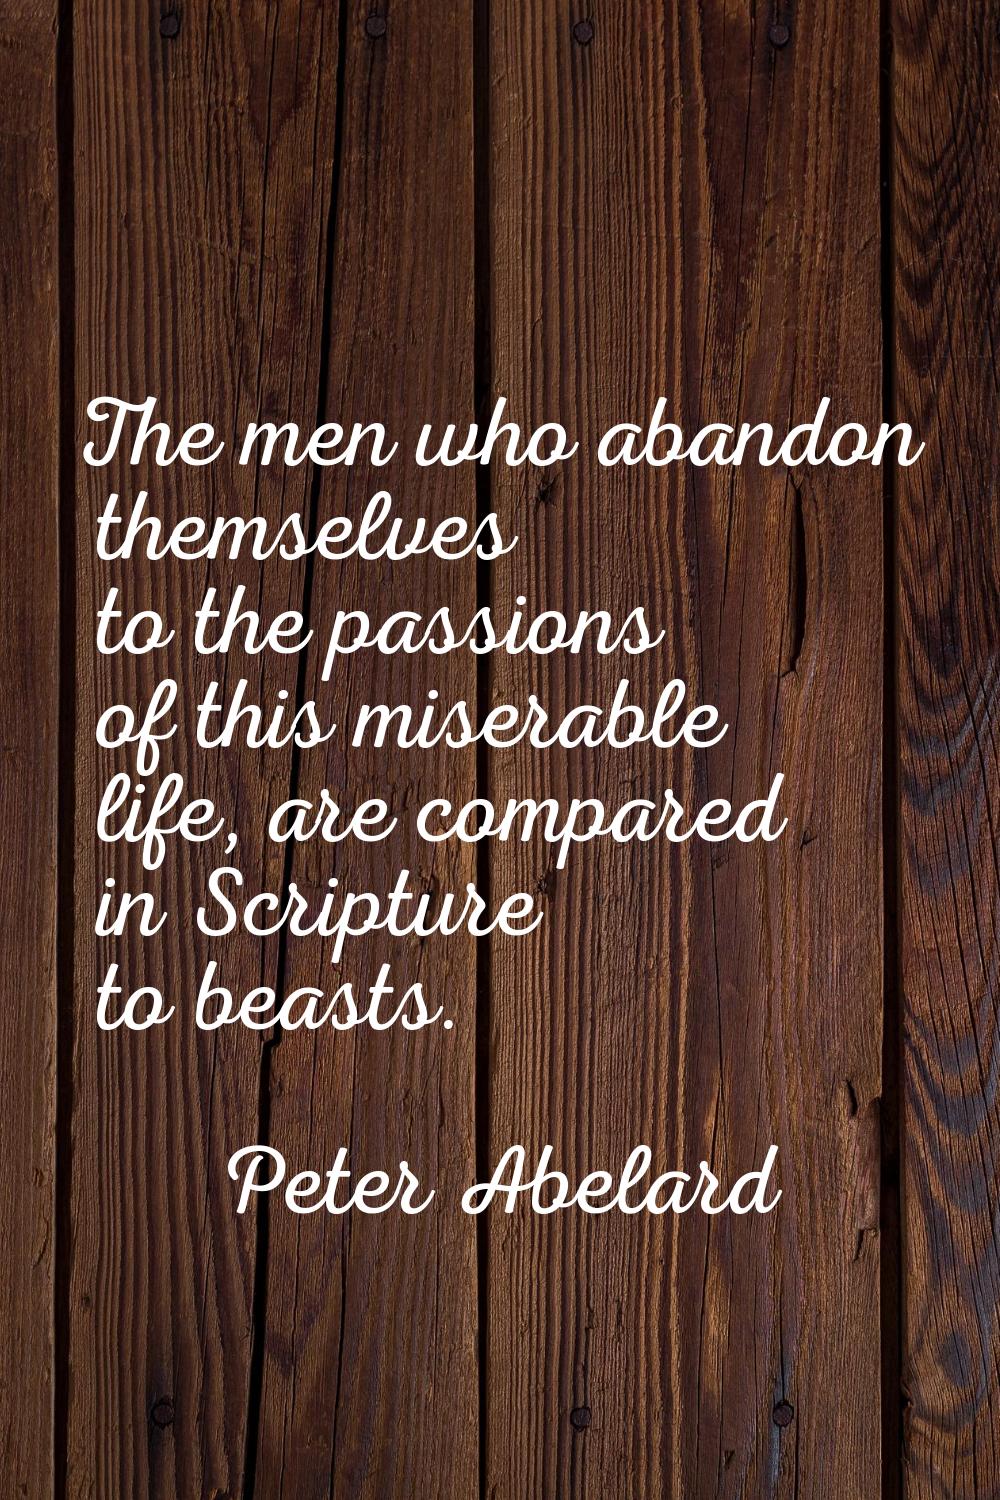 The men who abandon themselves to the passions of this miserable life, are compared in Scripture to